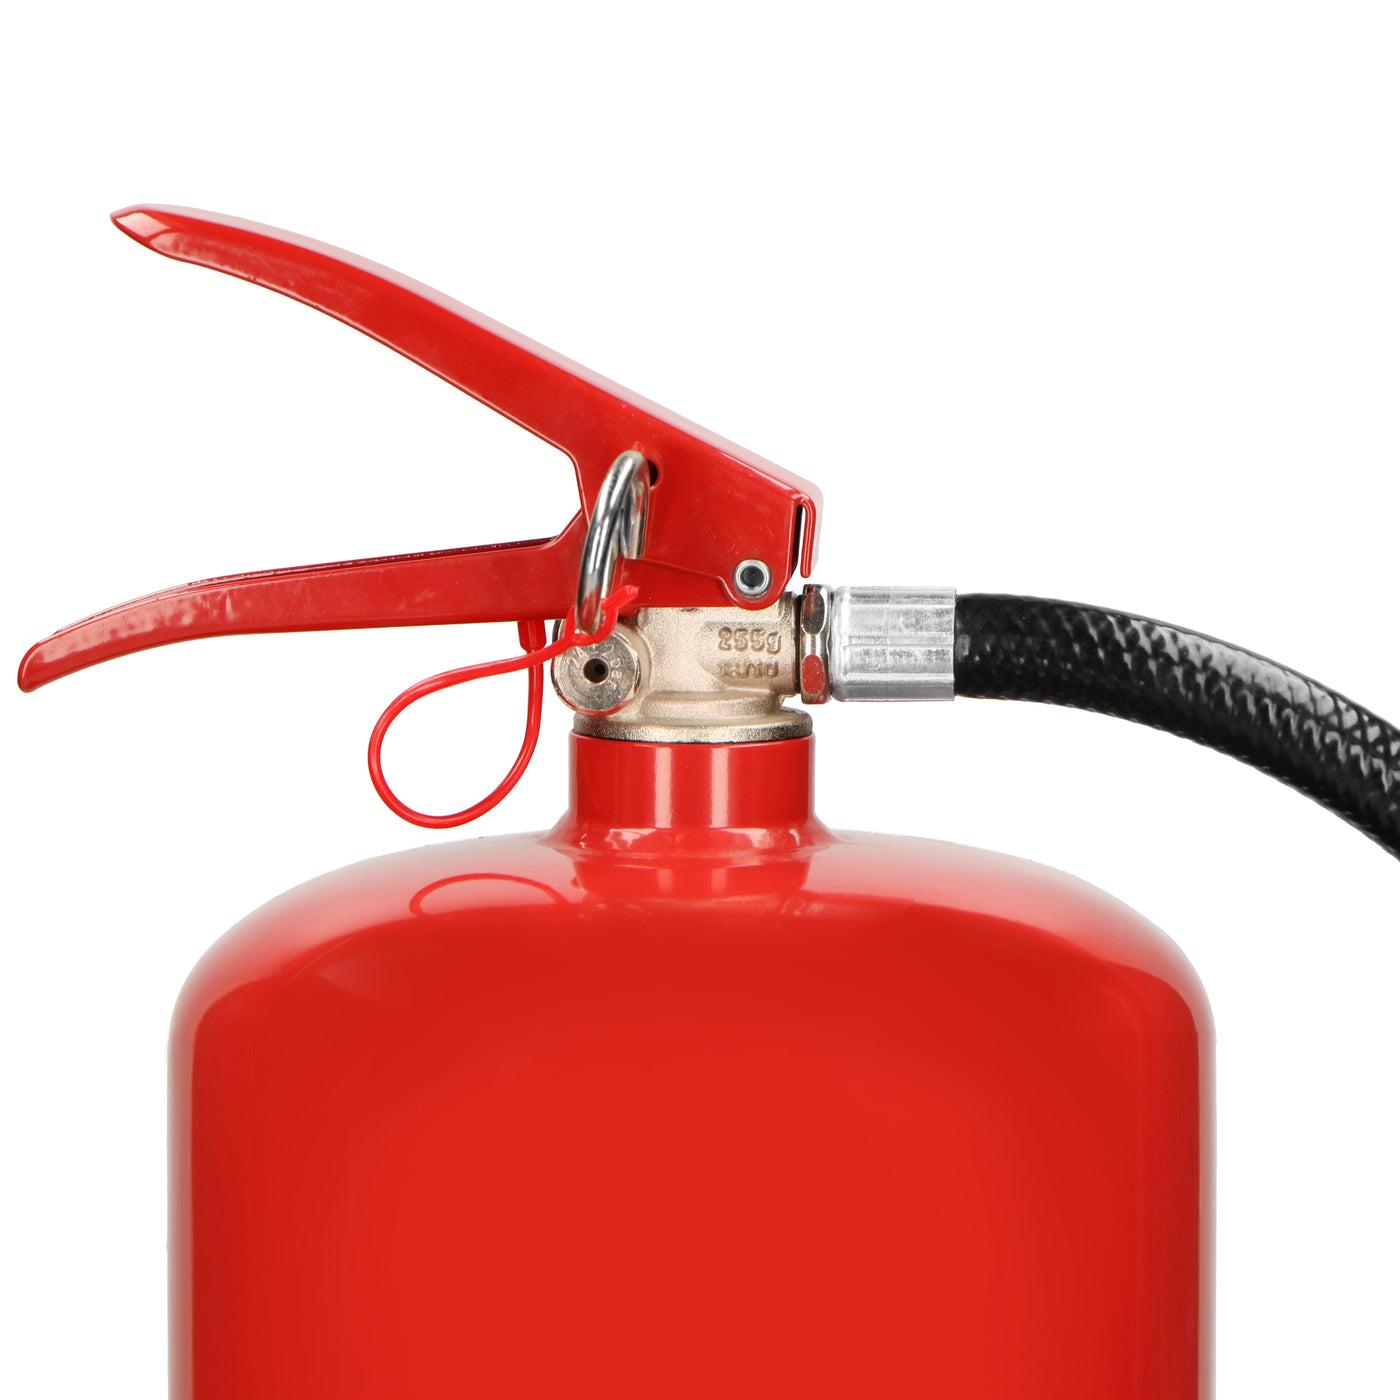 Alecto ABS-6 - Fire extinguisher foam 6 litres